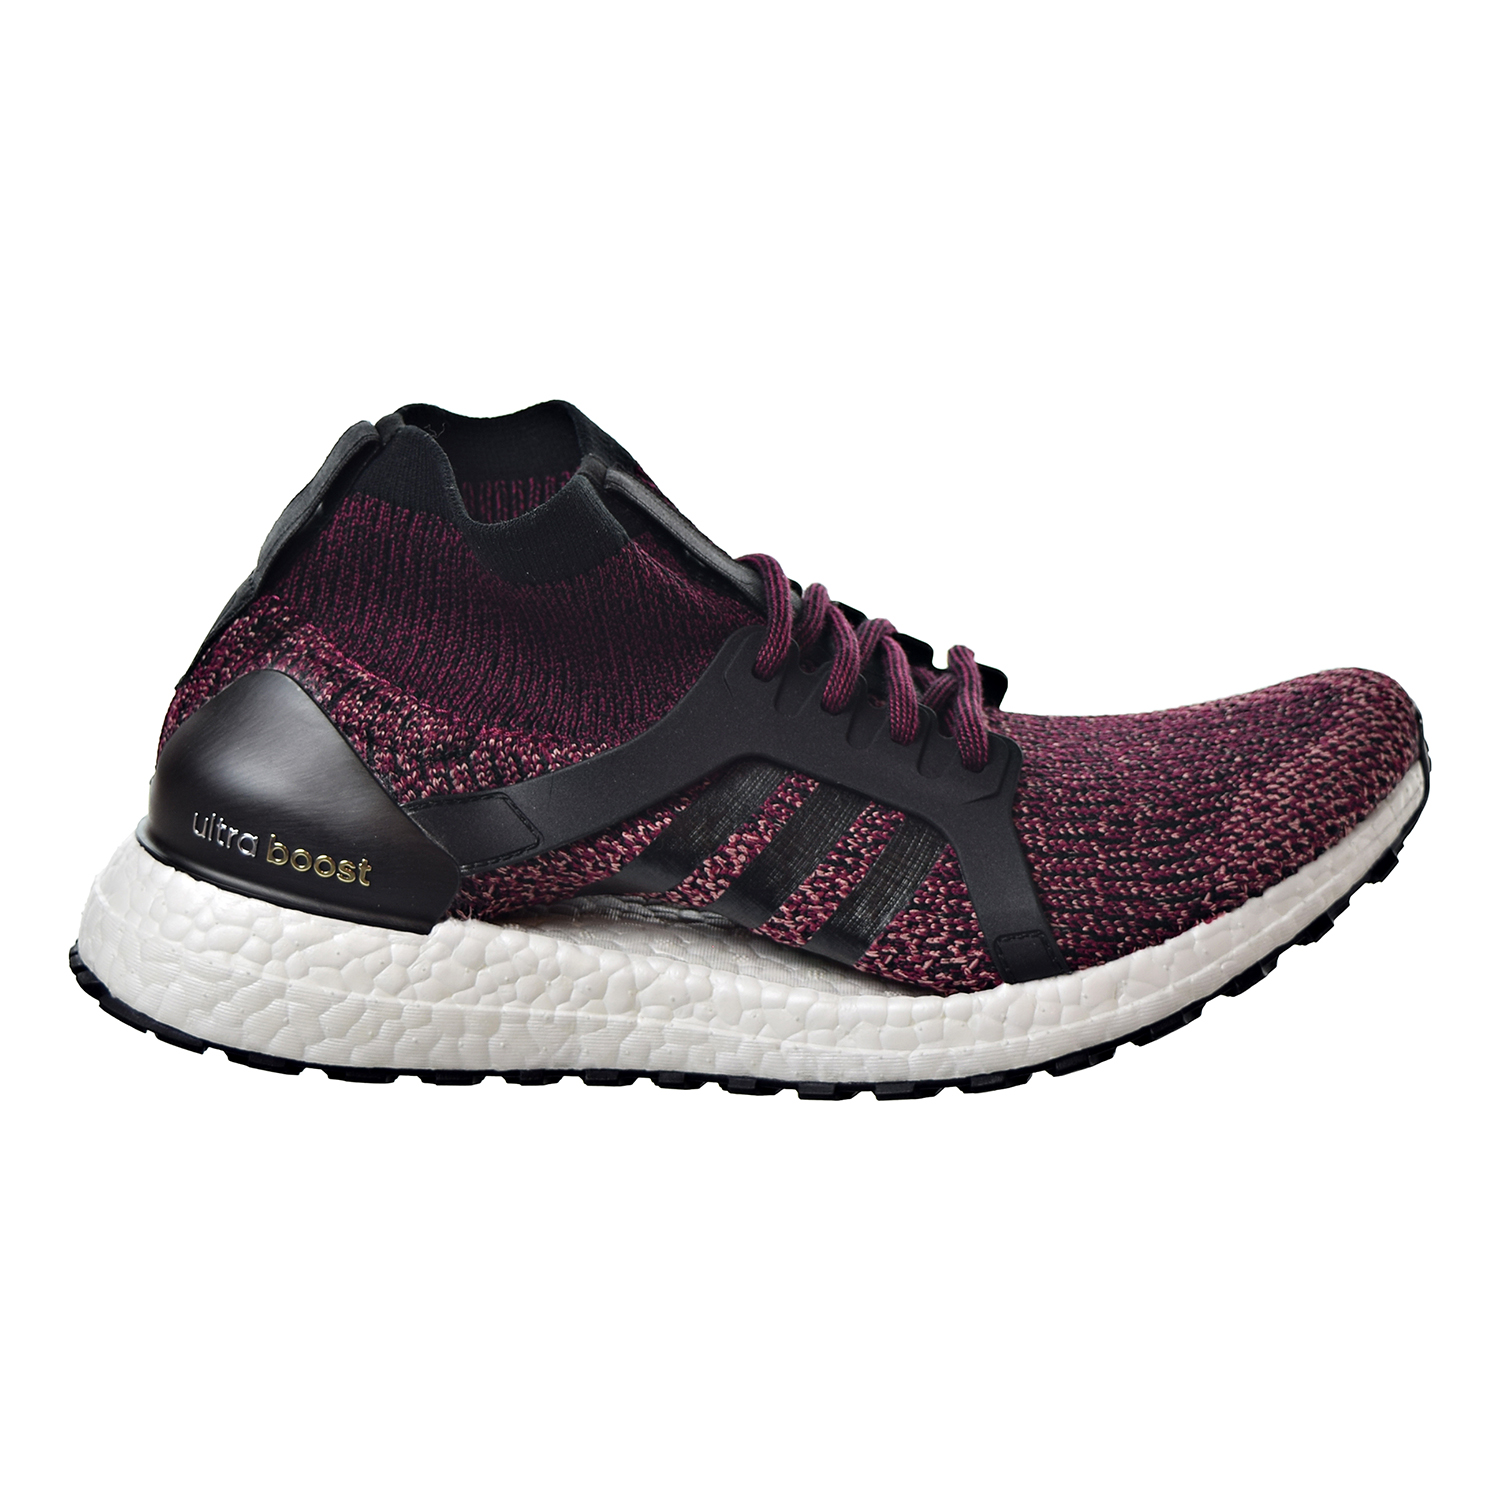 Running Shoes Ruby-Black-Pink BY1678 